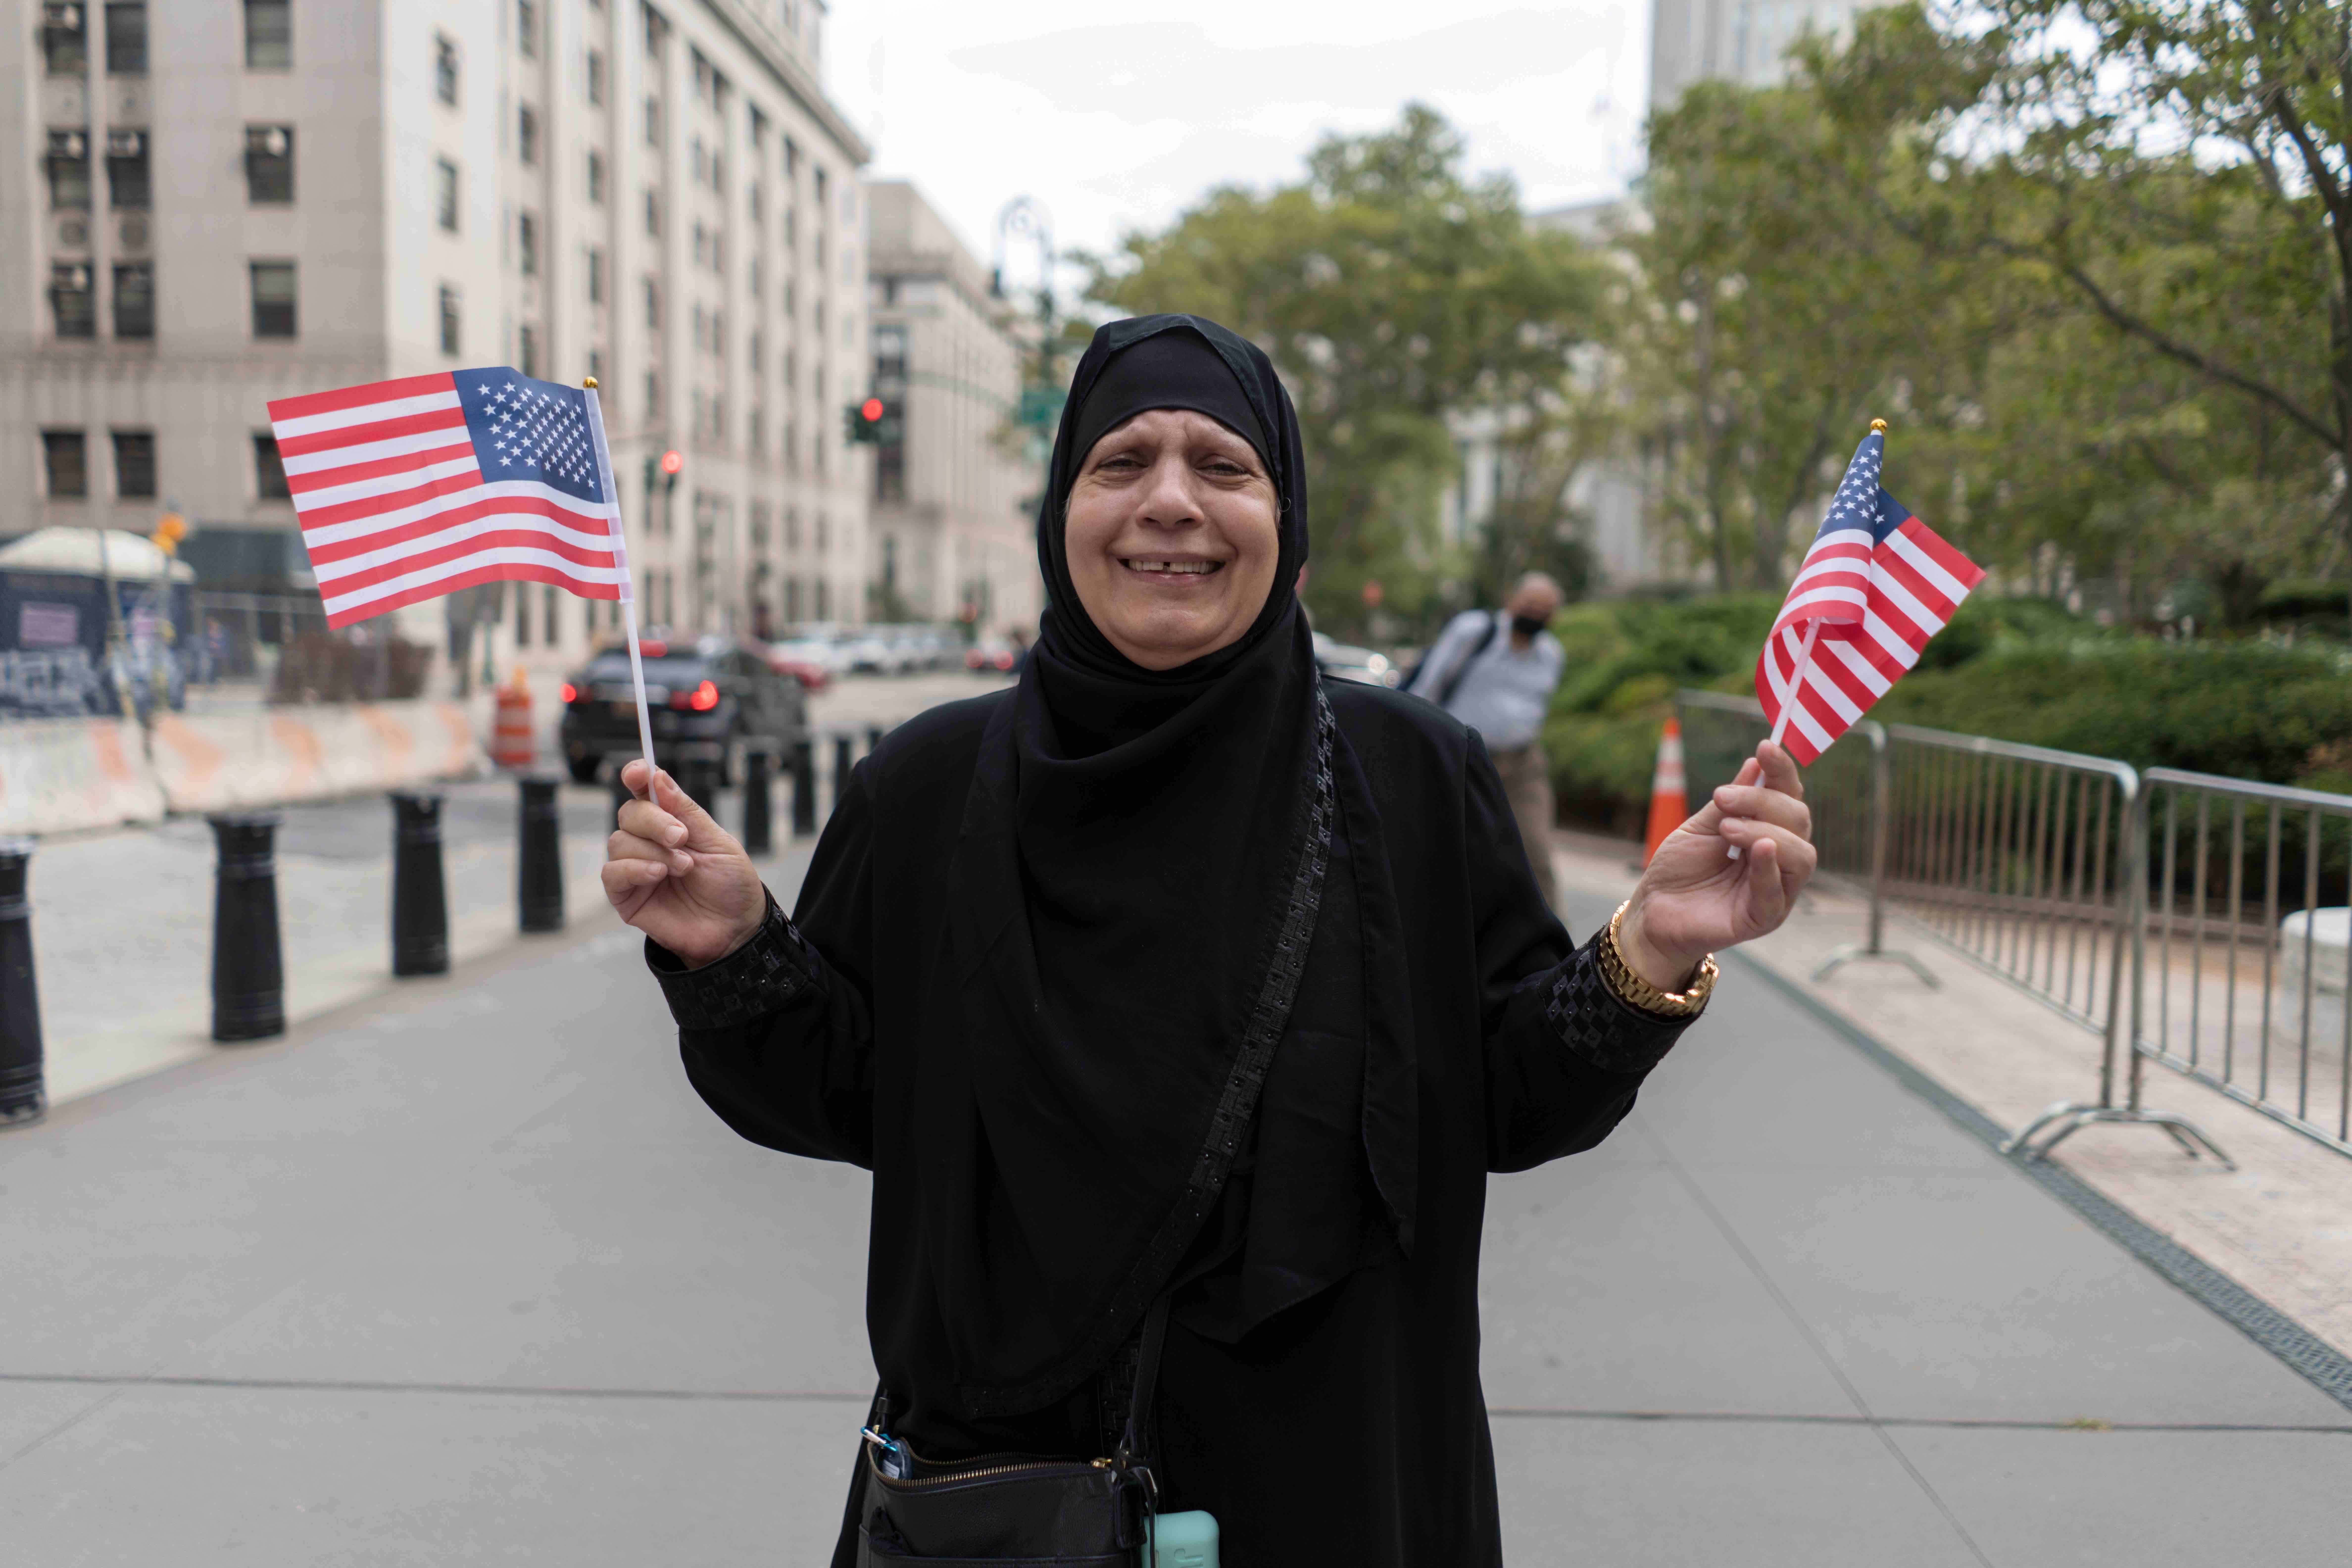 Maha, an Iraqi refugee and mother of five, studied hard for her U.S. citizenship.